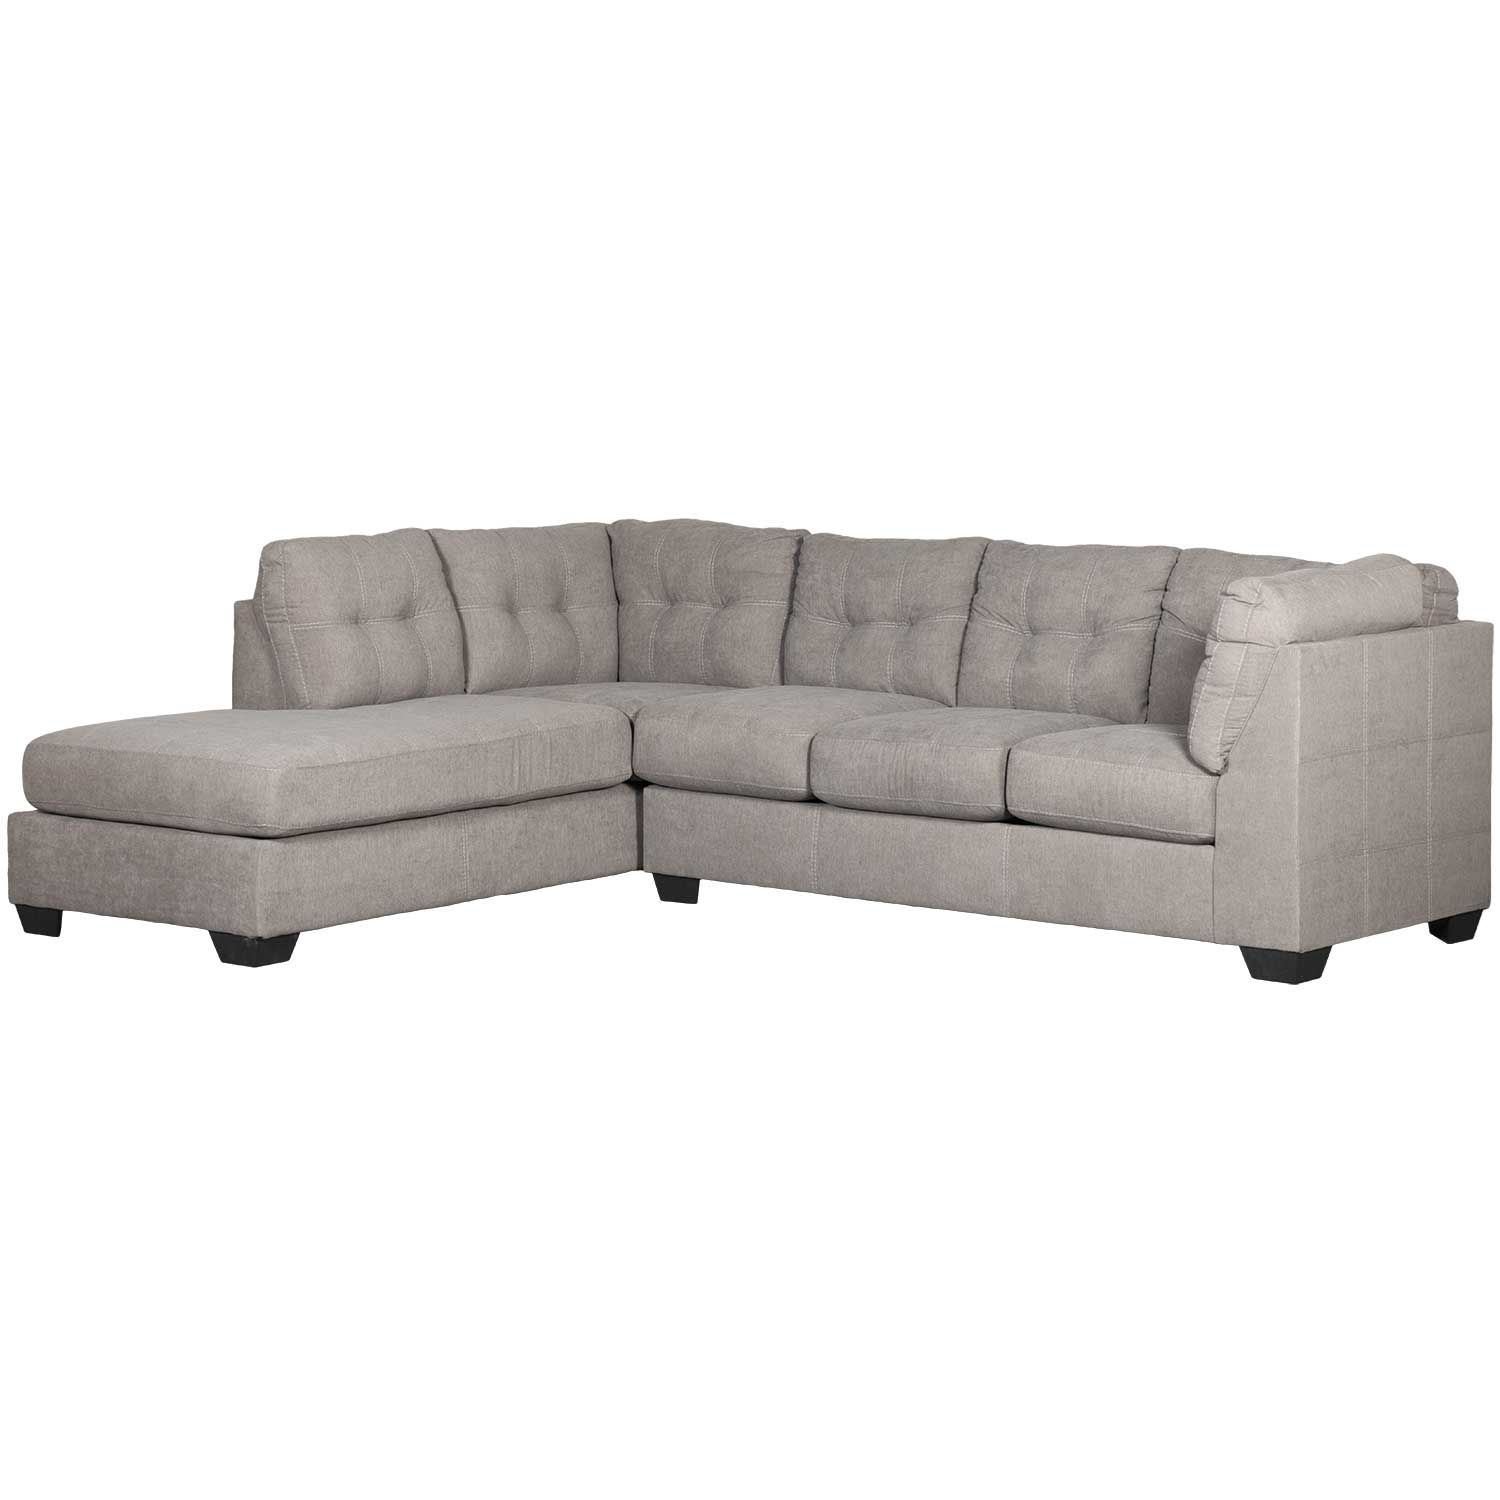 Maier Charcoal 2 Piece Sectional With Laf Chaise